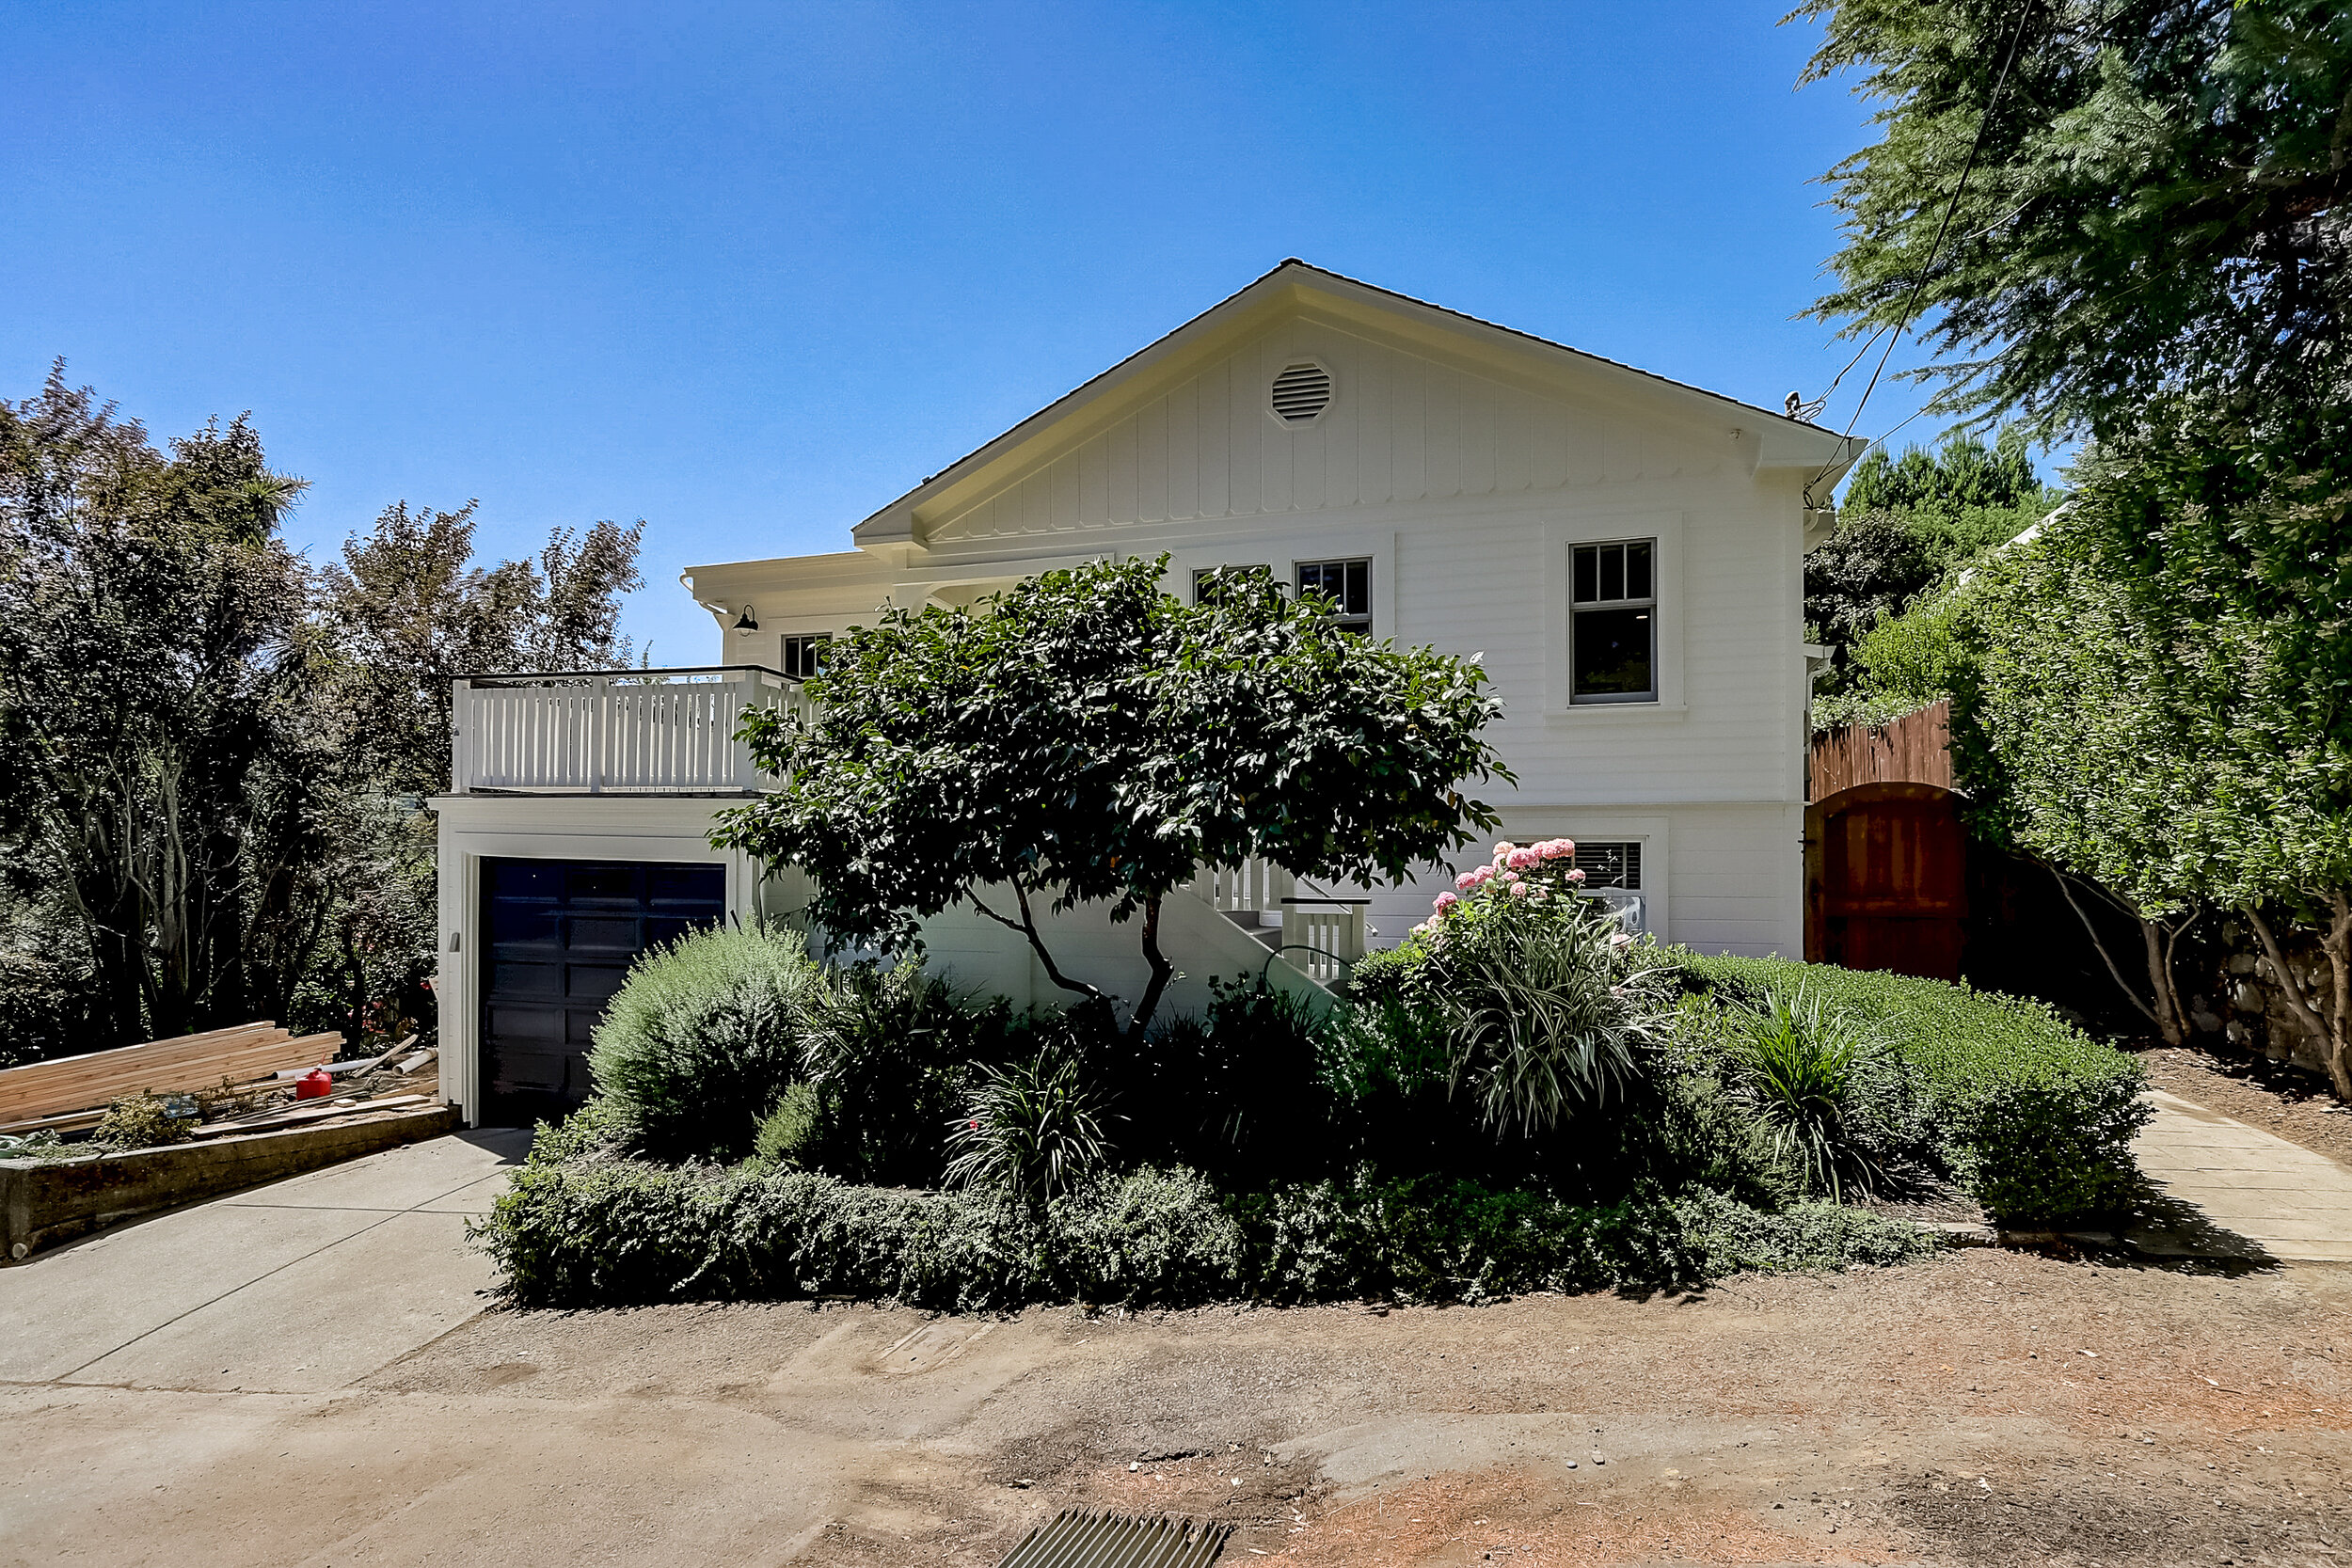 Own Marin Barr Haney Whitney Potter For Sale 9 Terrace Avenue, Kentfield California Marin County #1 Real Esate Agents-38.jpg